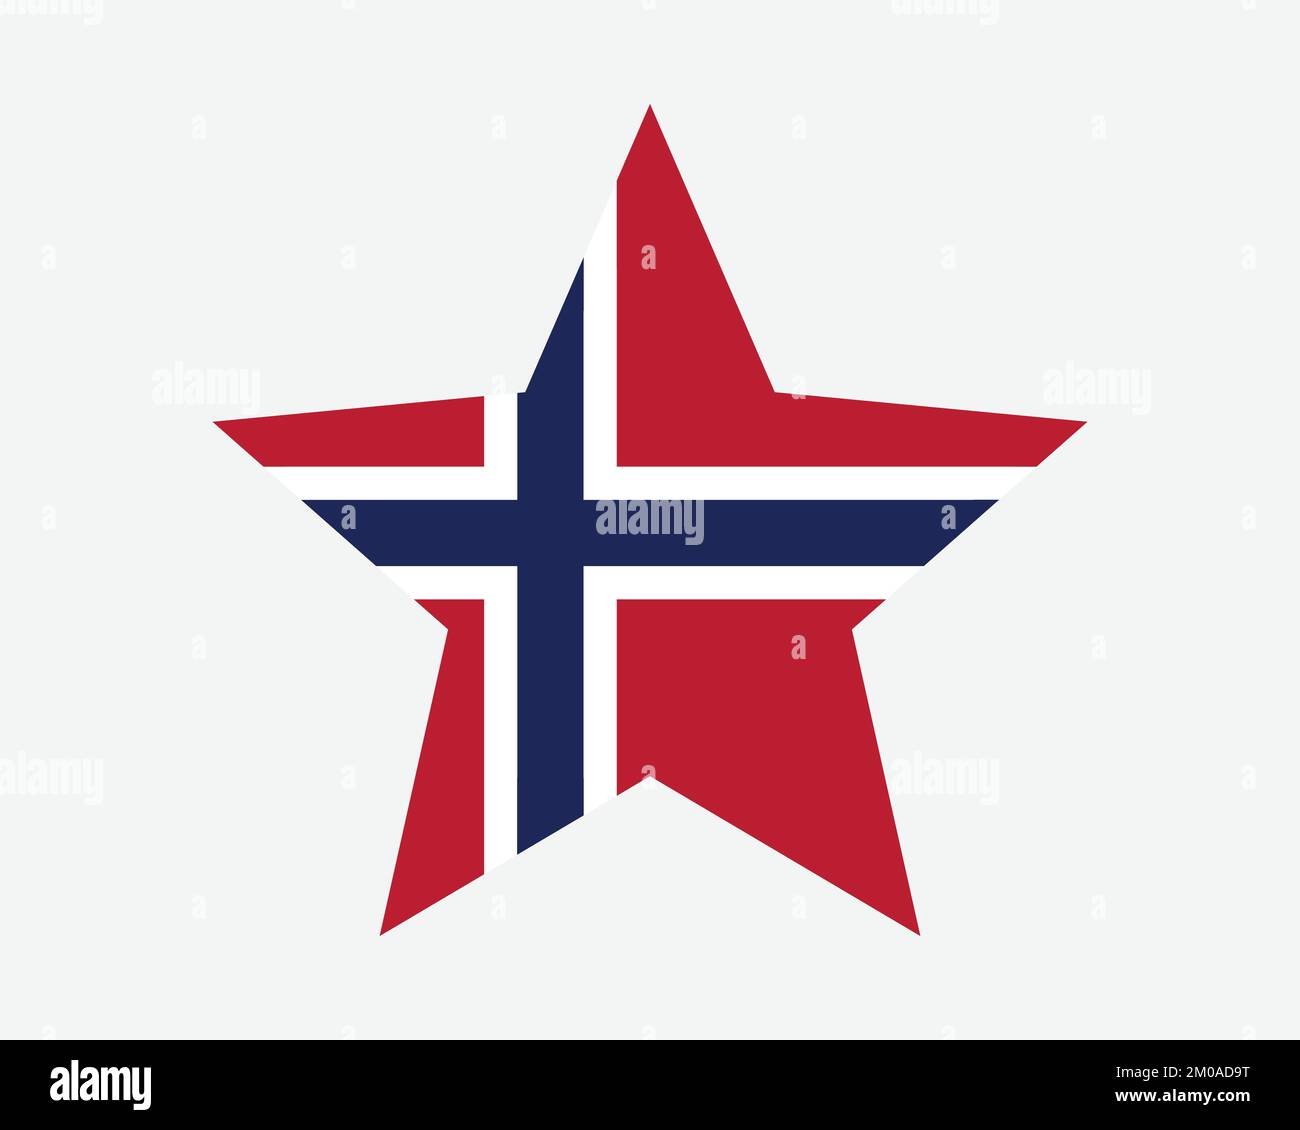 Norway Star Flag. Norwegian Star Shape Flag. Kingdom of Norway Country National Banner Icon Symbol Vector Flat Artwork Graphic Illustration Stock Vector